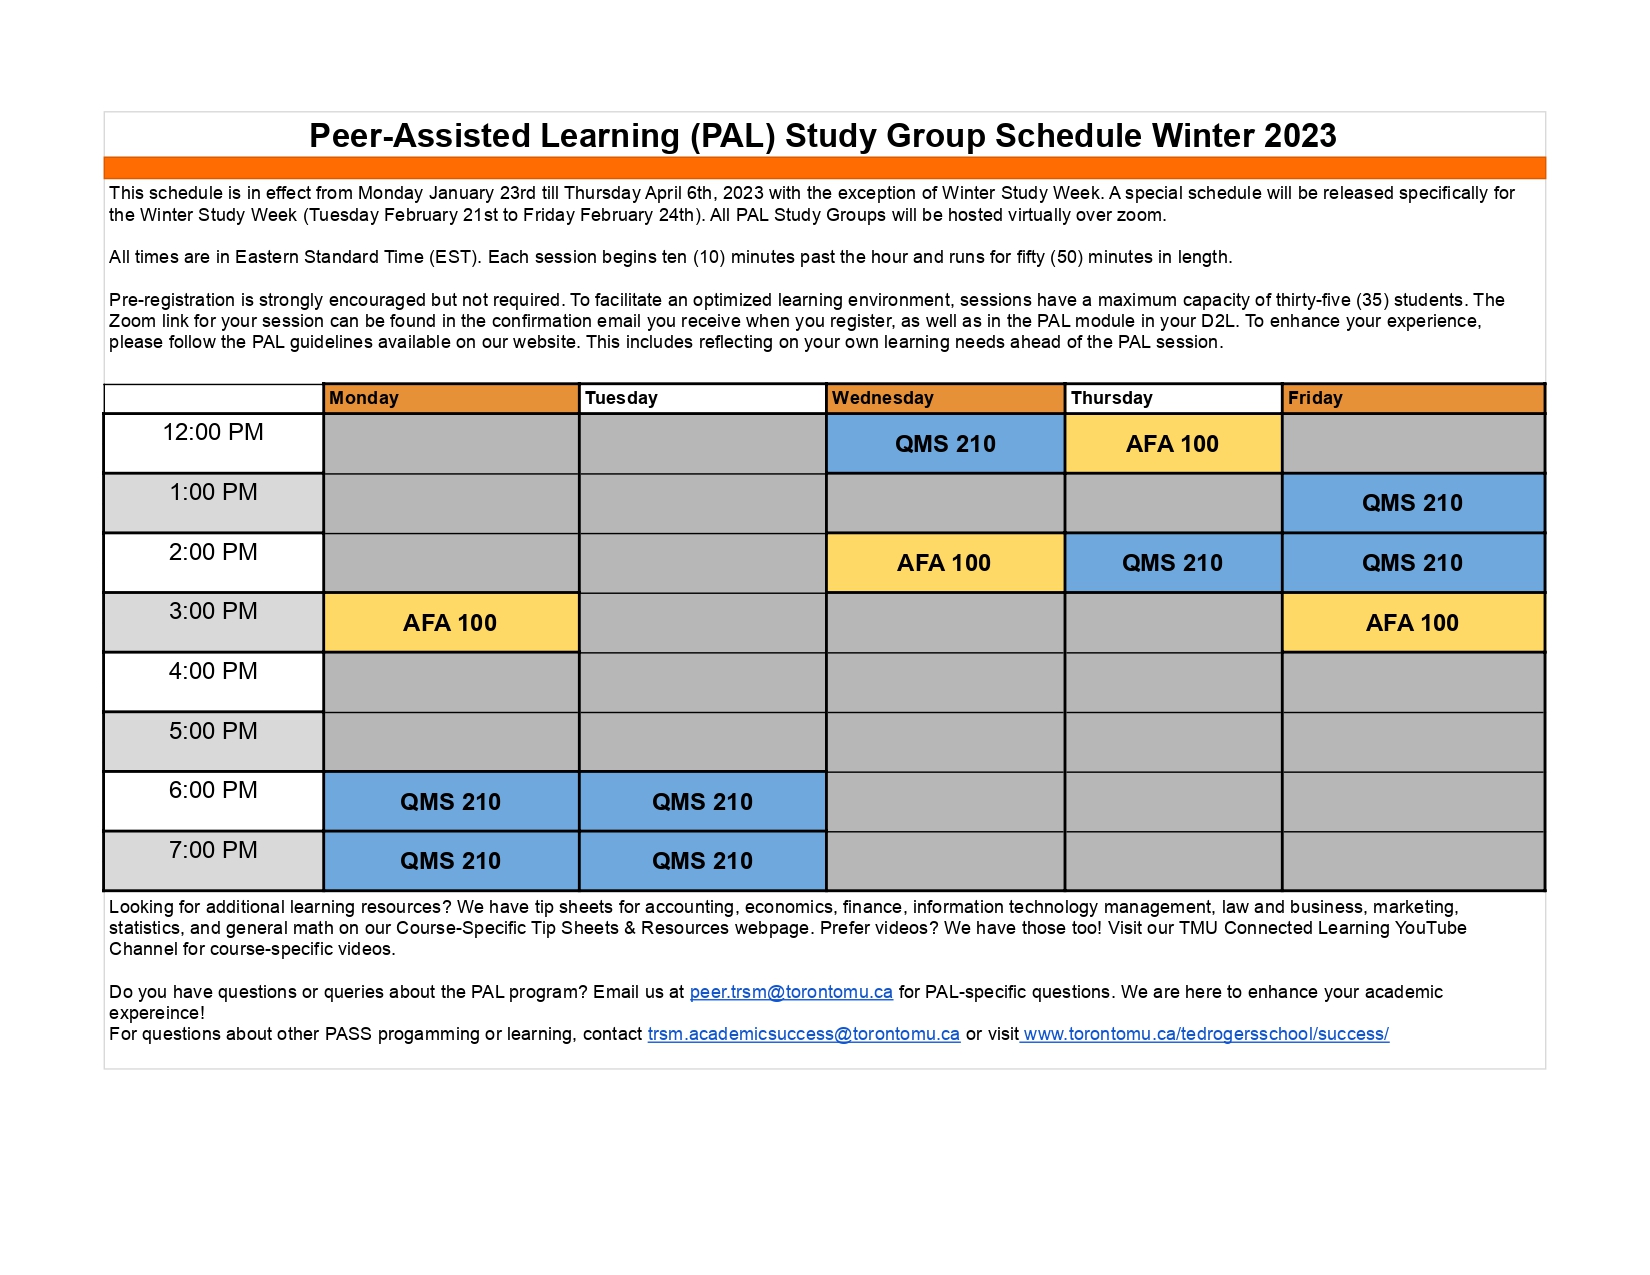 Peer-Assisted Learning Winter 2023 Schedule